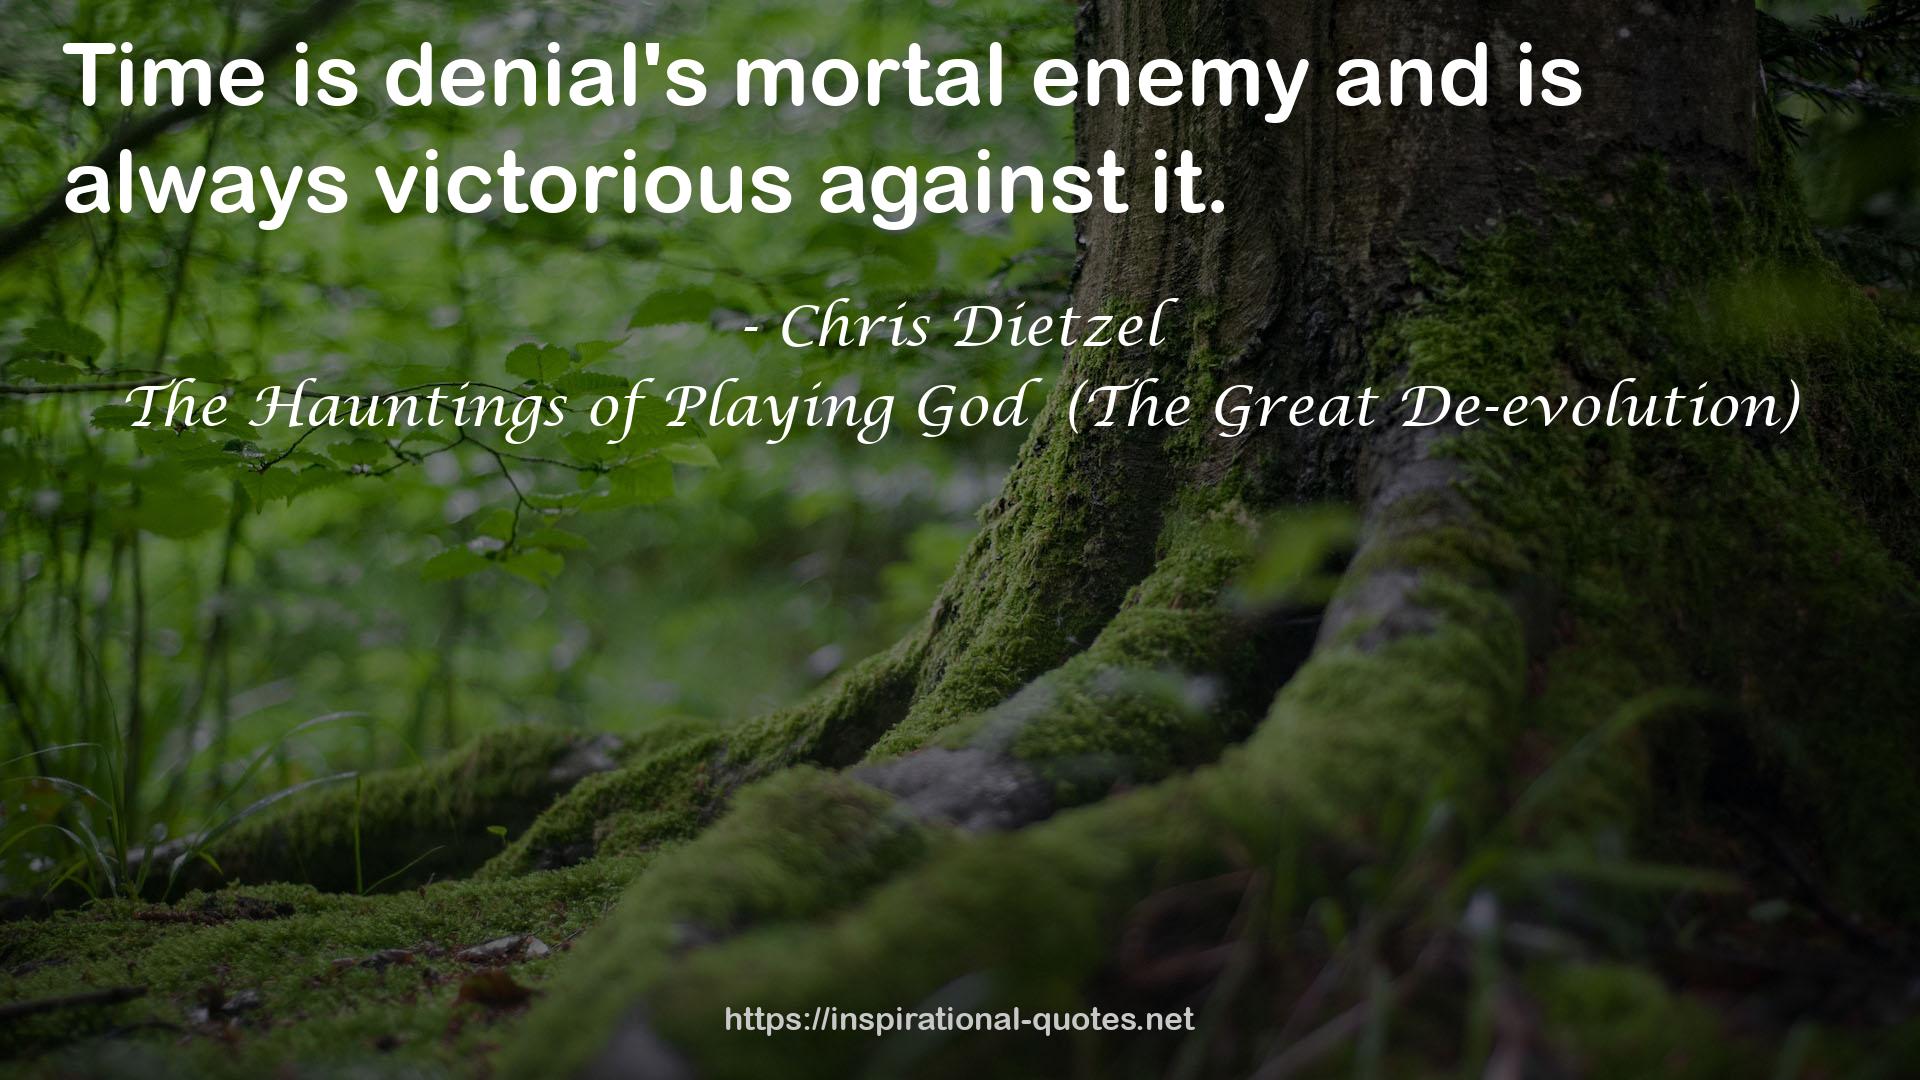 The Hauntings of Playing God  (The Great De-evolution) QUOTES